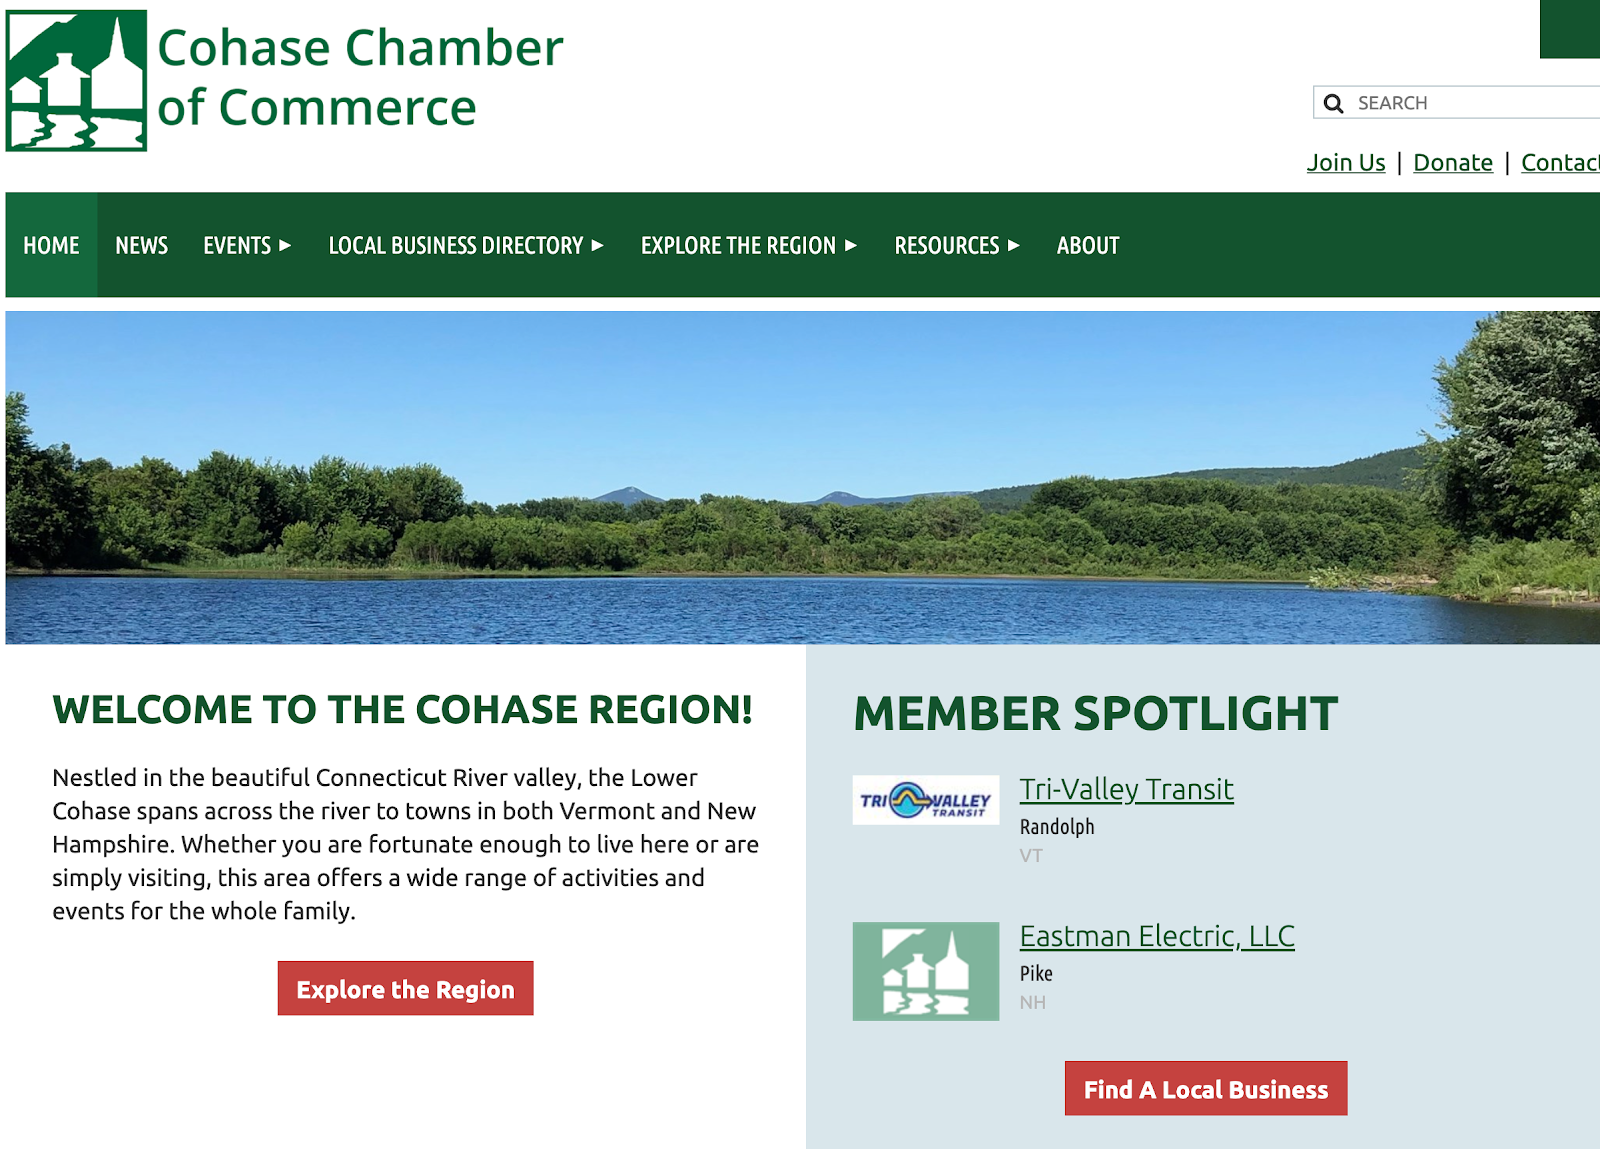 Cohase Chamber of Commerce